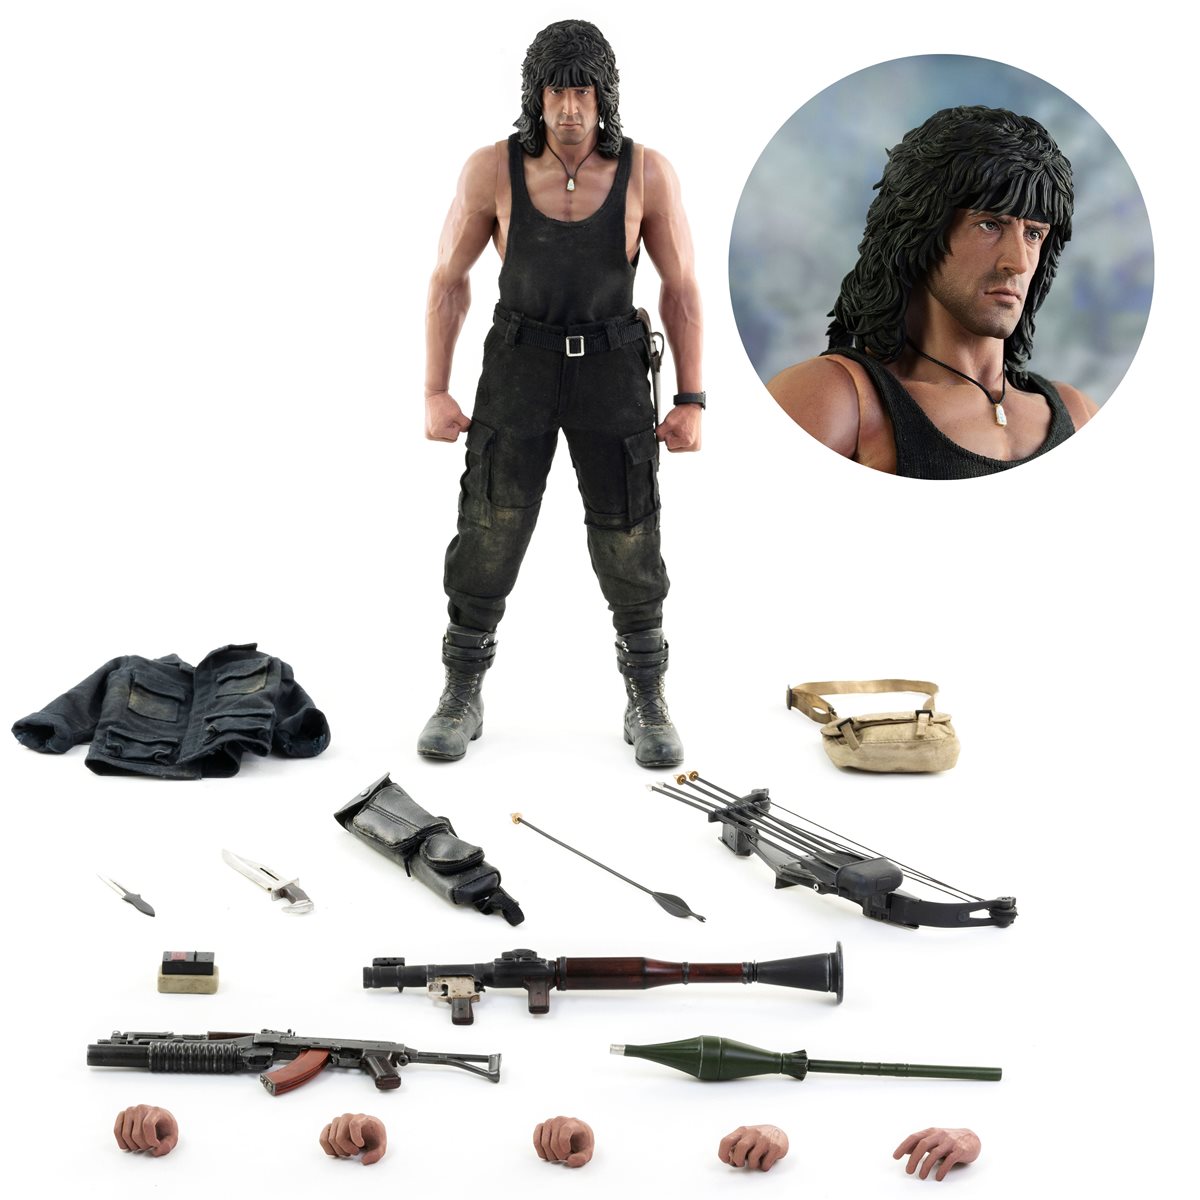 C4 Explosive Details about   1/6 Scale Toy Rambo III